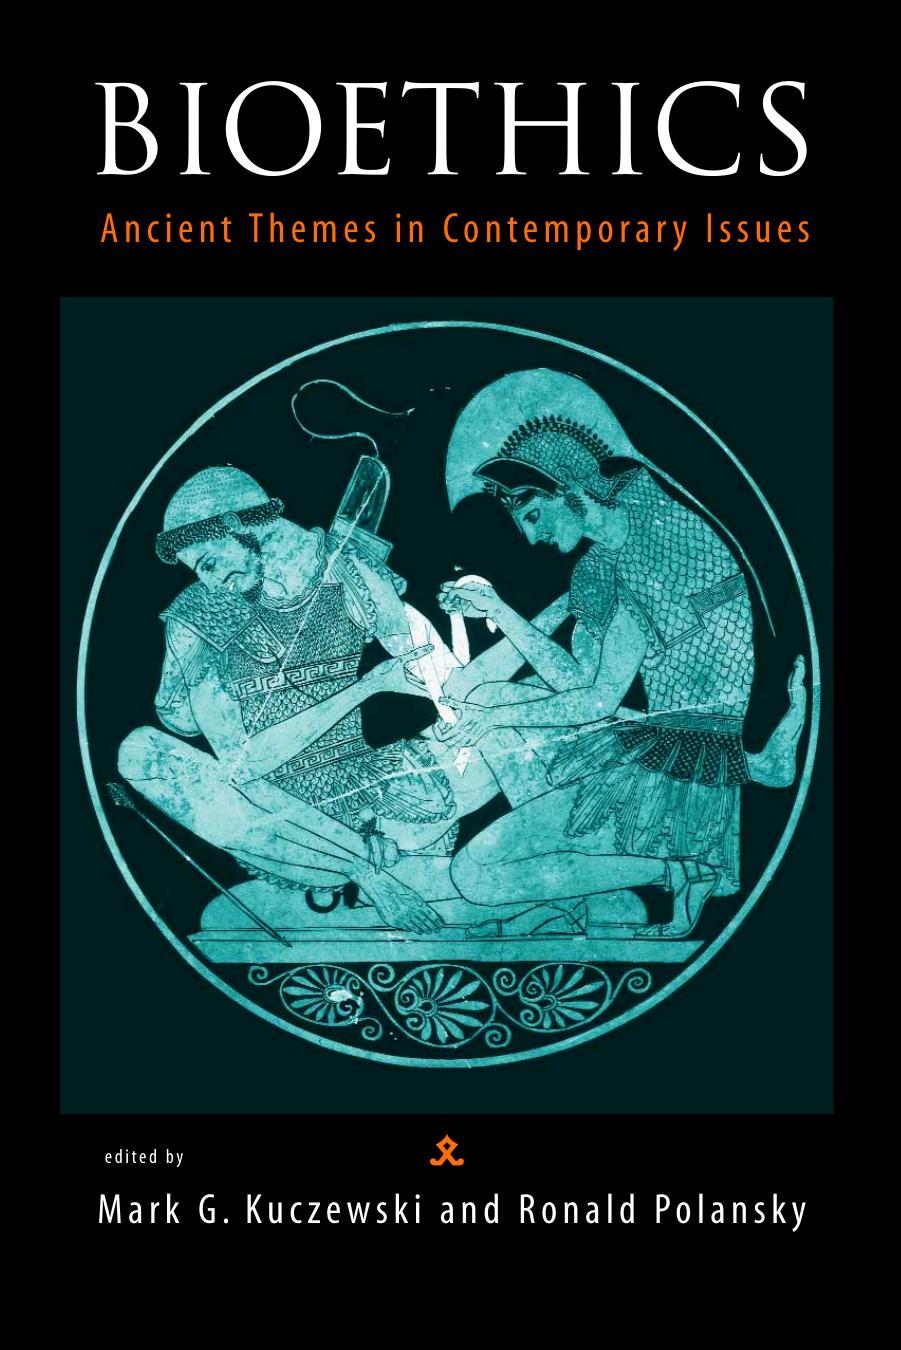 Bioethics: Ancient Themes in Contemporary Issues